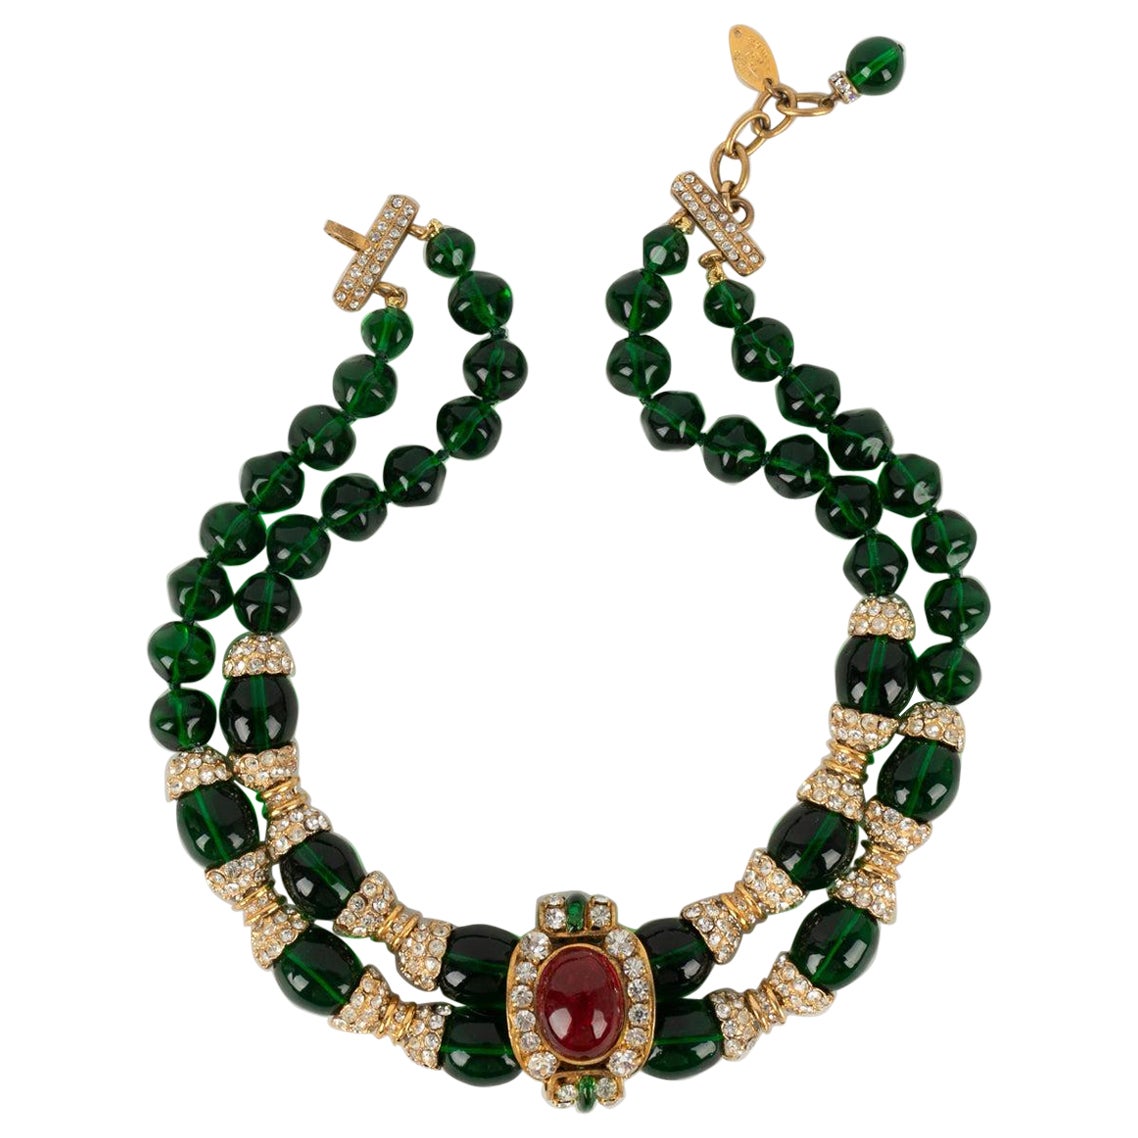 Chanel Golden Metal Choker with Green Glass Pearls, 1983